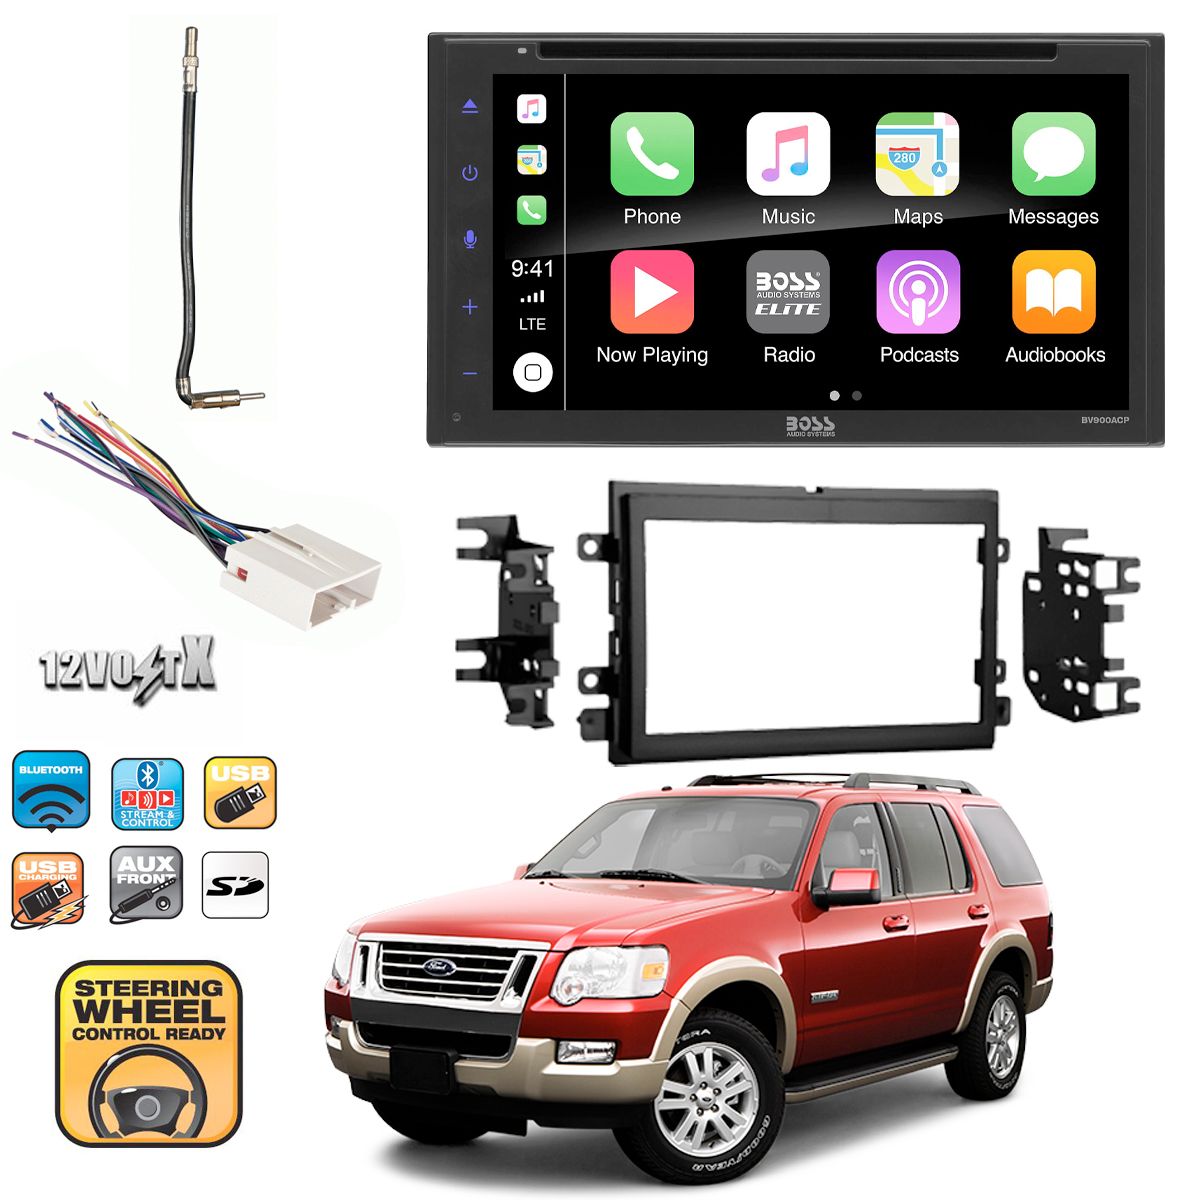 6.75" Multimeda Cd/Dvd Receiver CarPlay, Android Auto USB, BT For Ford 2004-Up